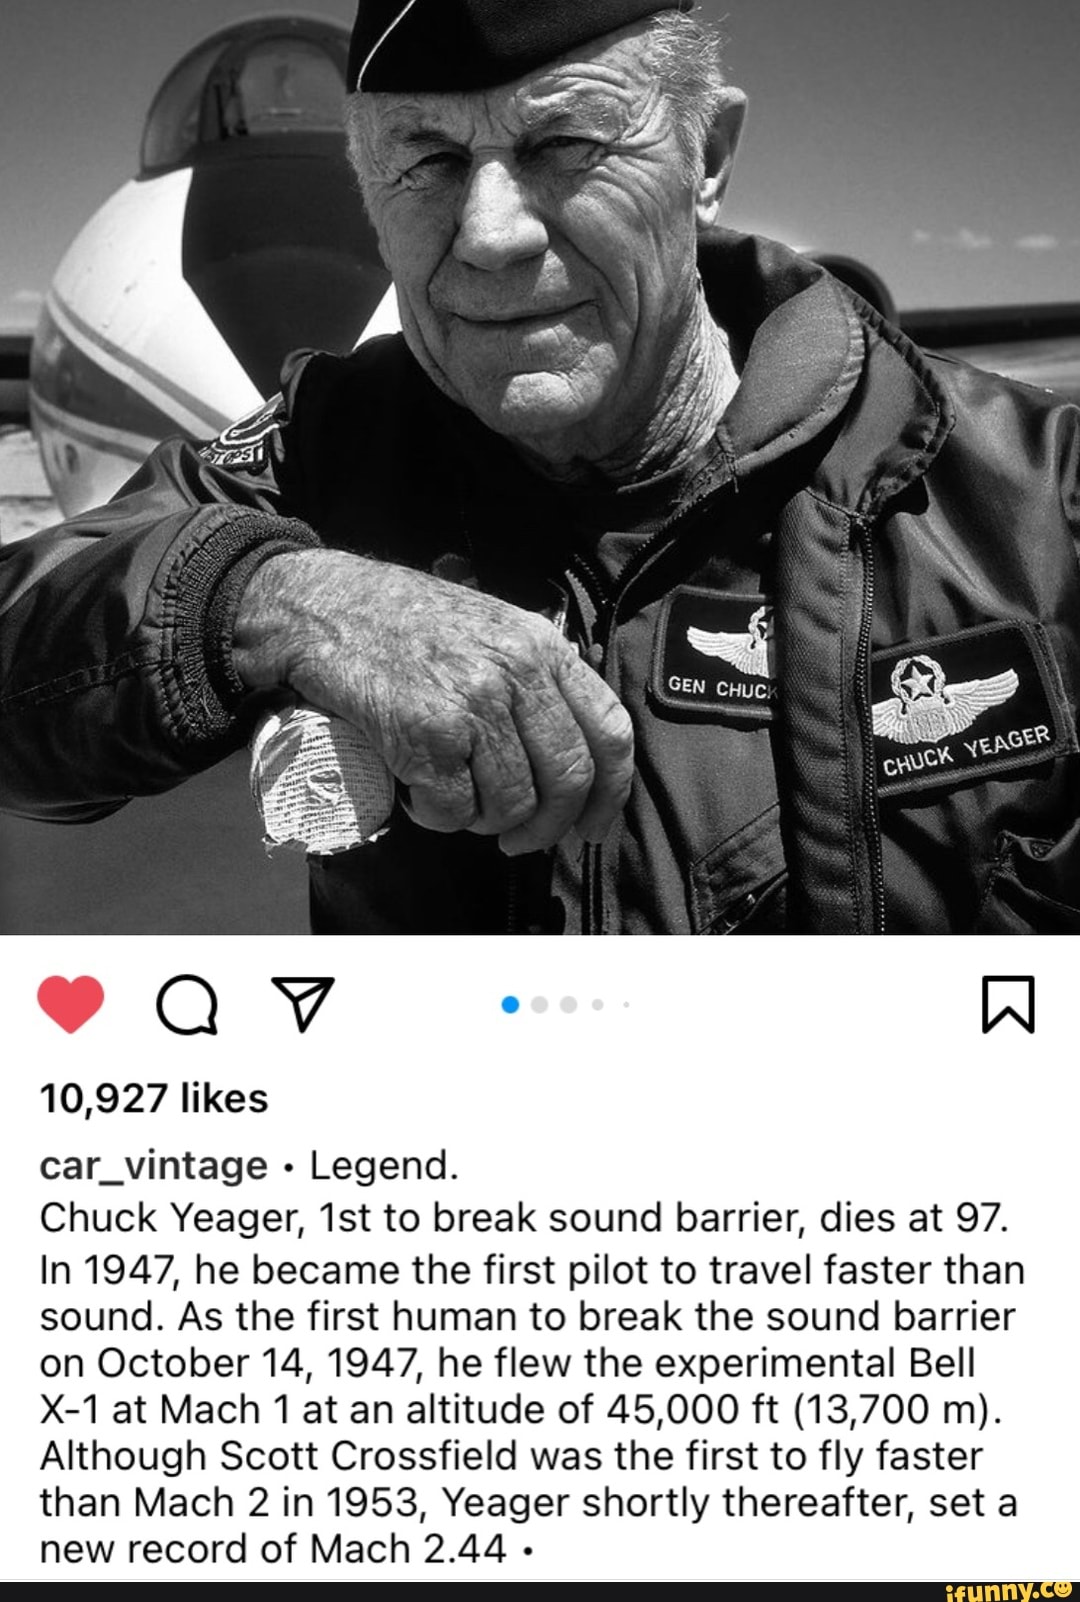 10,927 likes Al car_vintage Legend. Chuck Yeager, Ist to